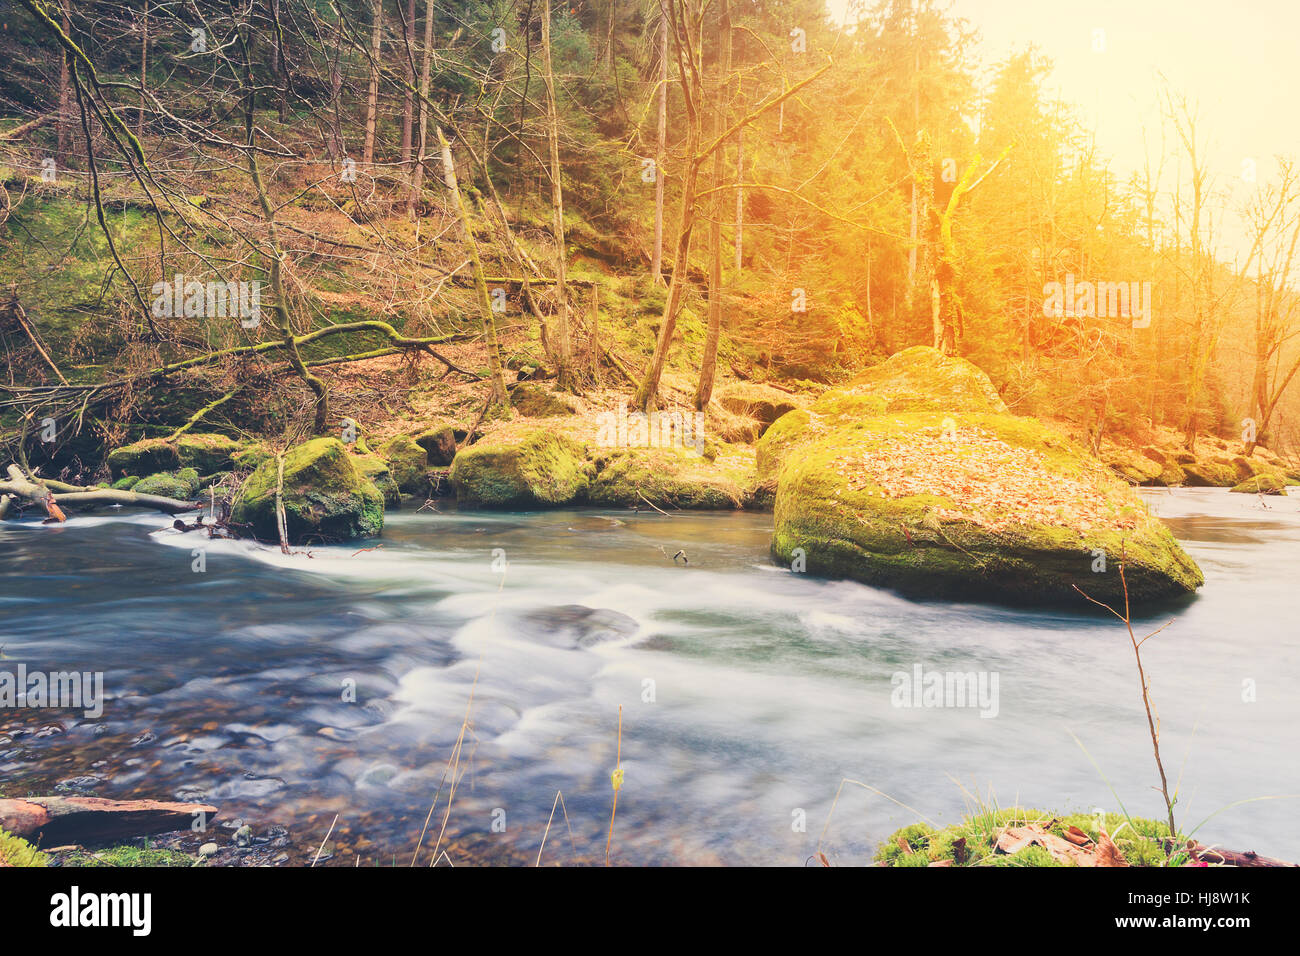 River in forest landscape during autumn, vintage filter and lens flare. Stock Photo